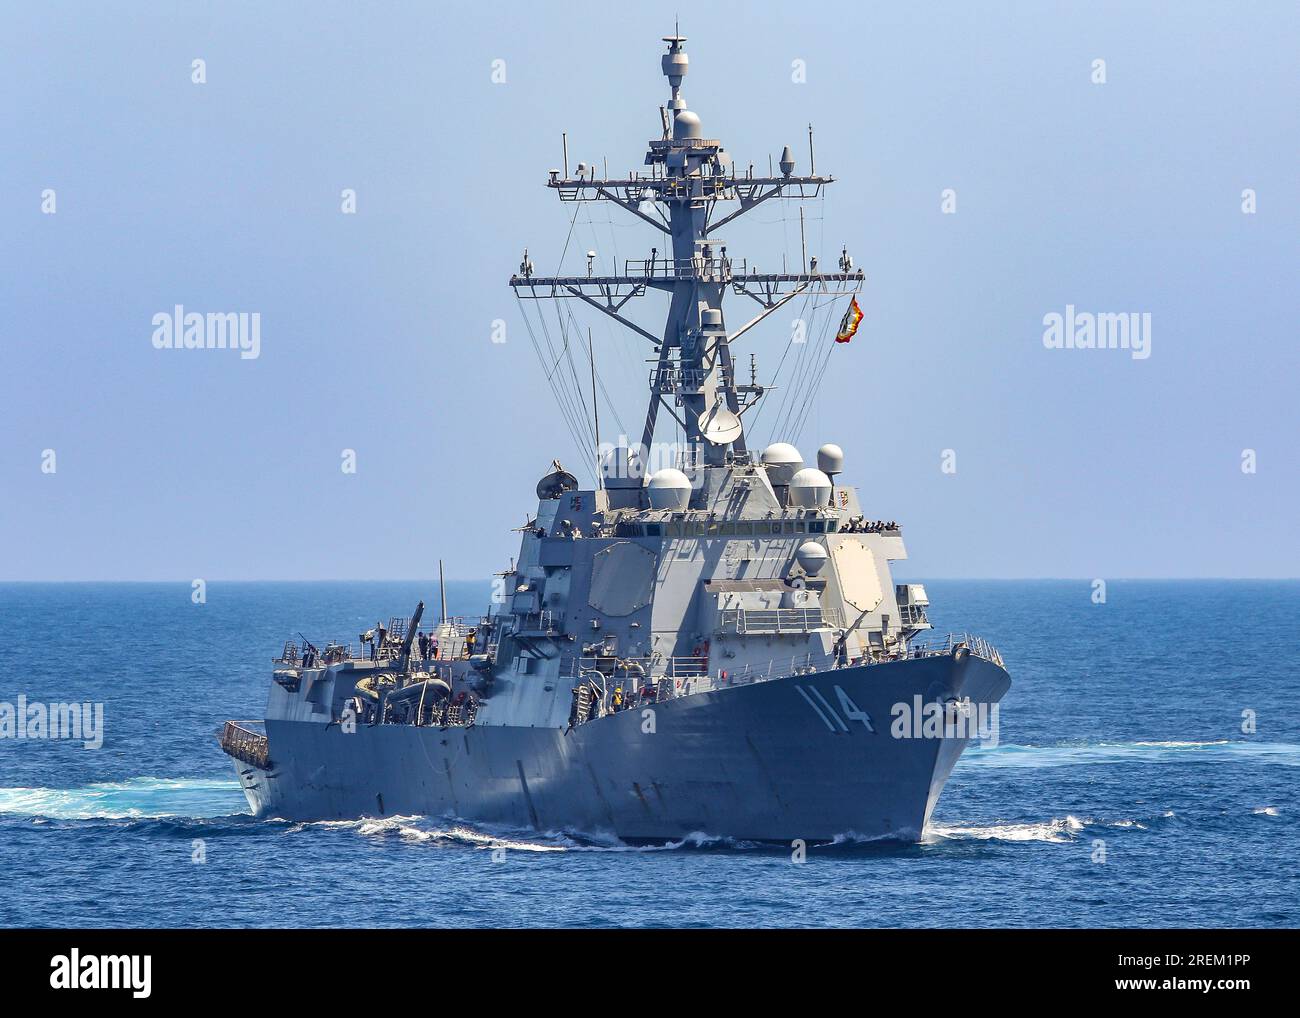 Sea of Japan, Japan. 17 July, 2023. The U.S. Navy Arleigh-burke class guided-missile destroyers USS Ralph Johnson patrols international shipping lanes, July 17, 2023 in the Gulf of Oman. The U.S. Navy stepped up patrols after Iran harassed civilian shipping in the region.  Credit: MC2 Samantha Oblander/Planetpix/Alamy Live News Stock Photo